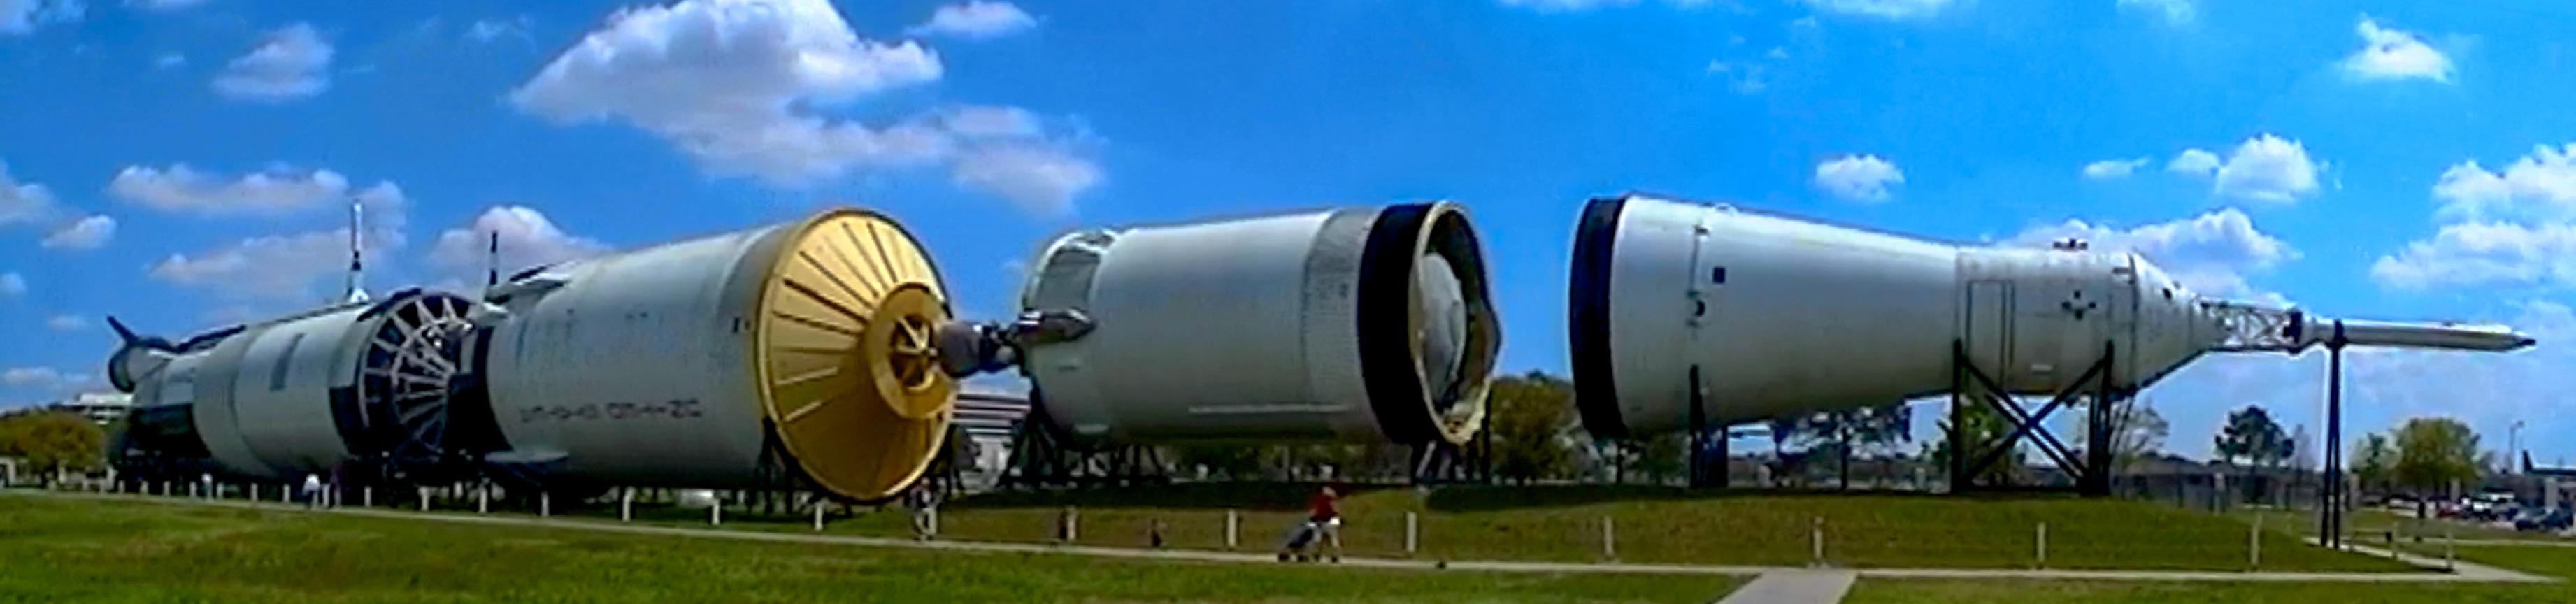 Panoramic view of the Saturn V.